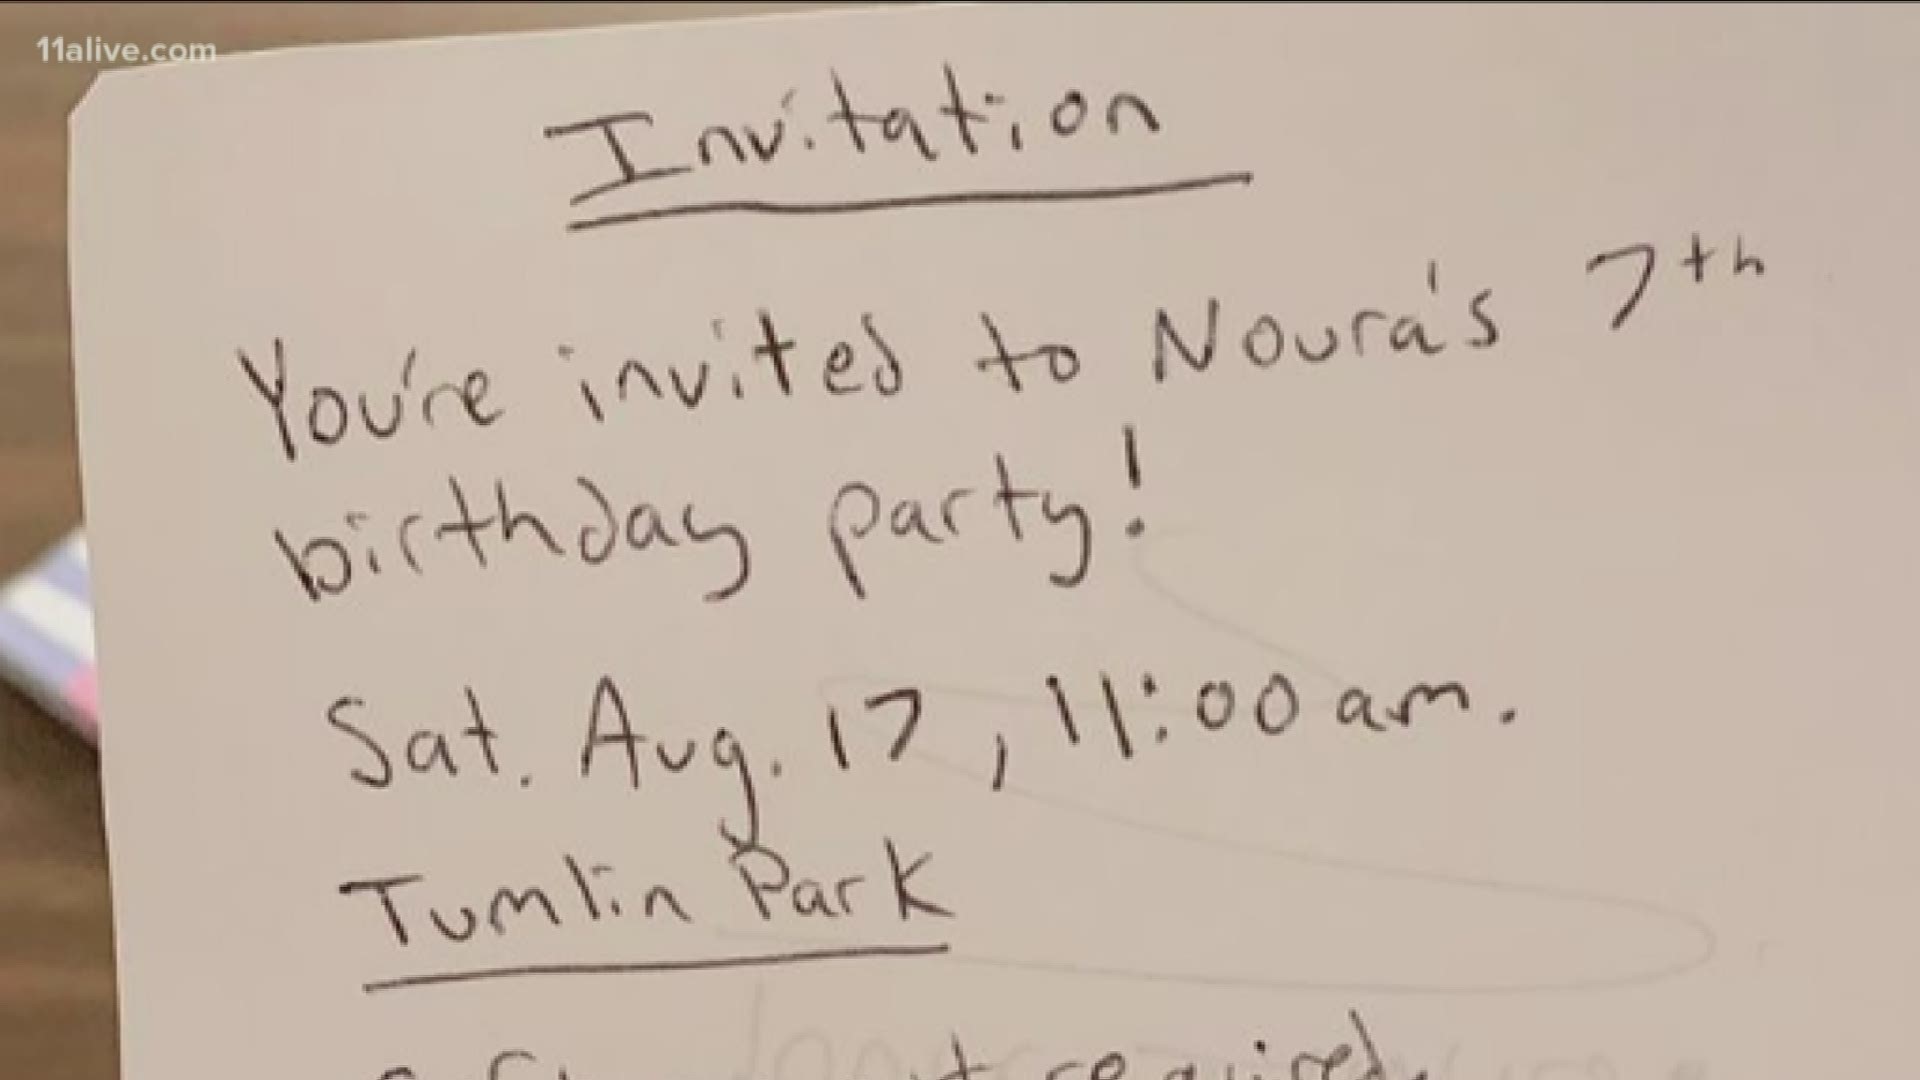 When the girl wrote this card to her teacher inviting her to her birthday party, she knew it could change everything